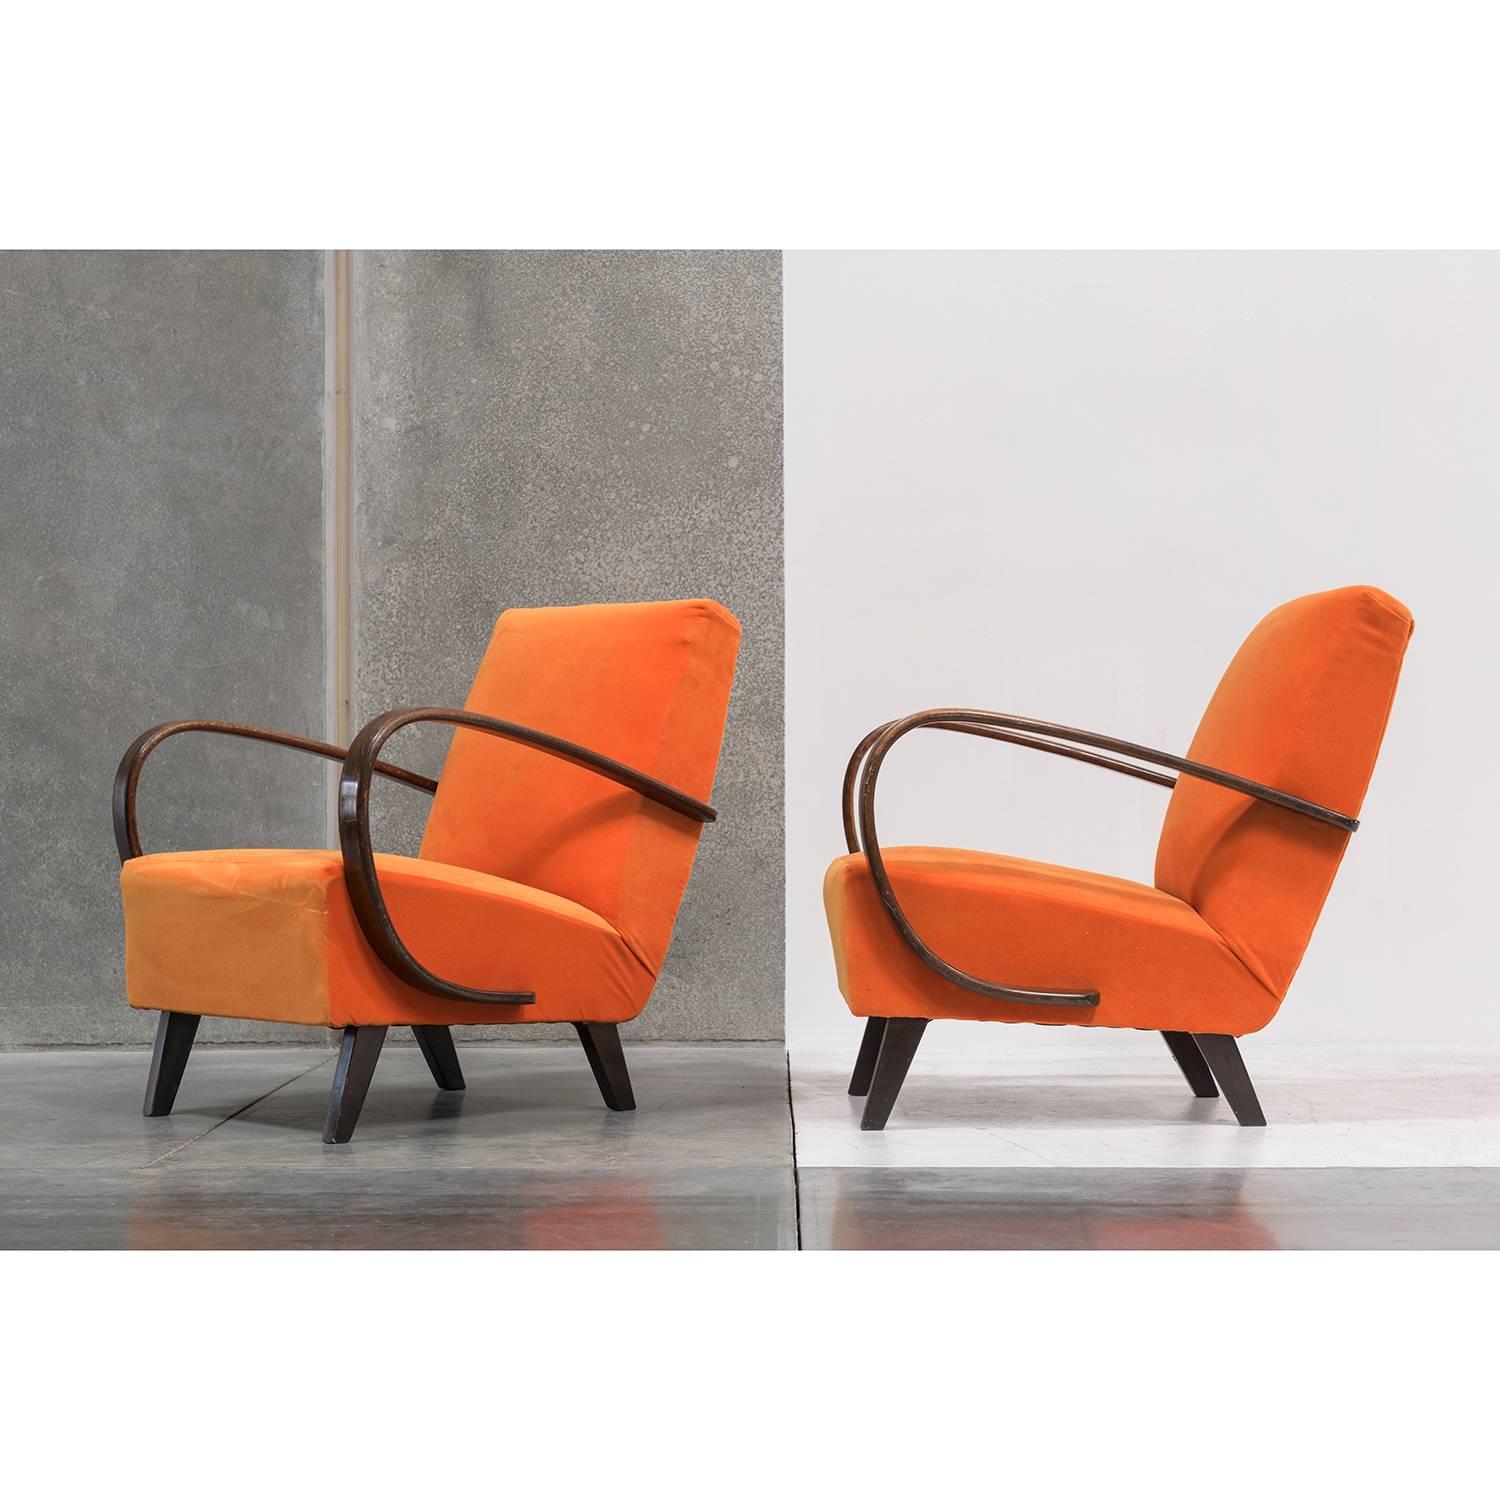 Newly reupholstered in orange velvet with bentwood arms. Manufactured by Spojene UP Zavody.